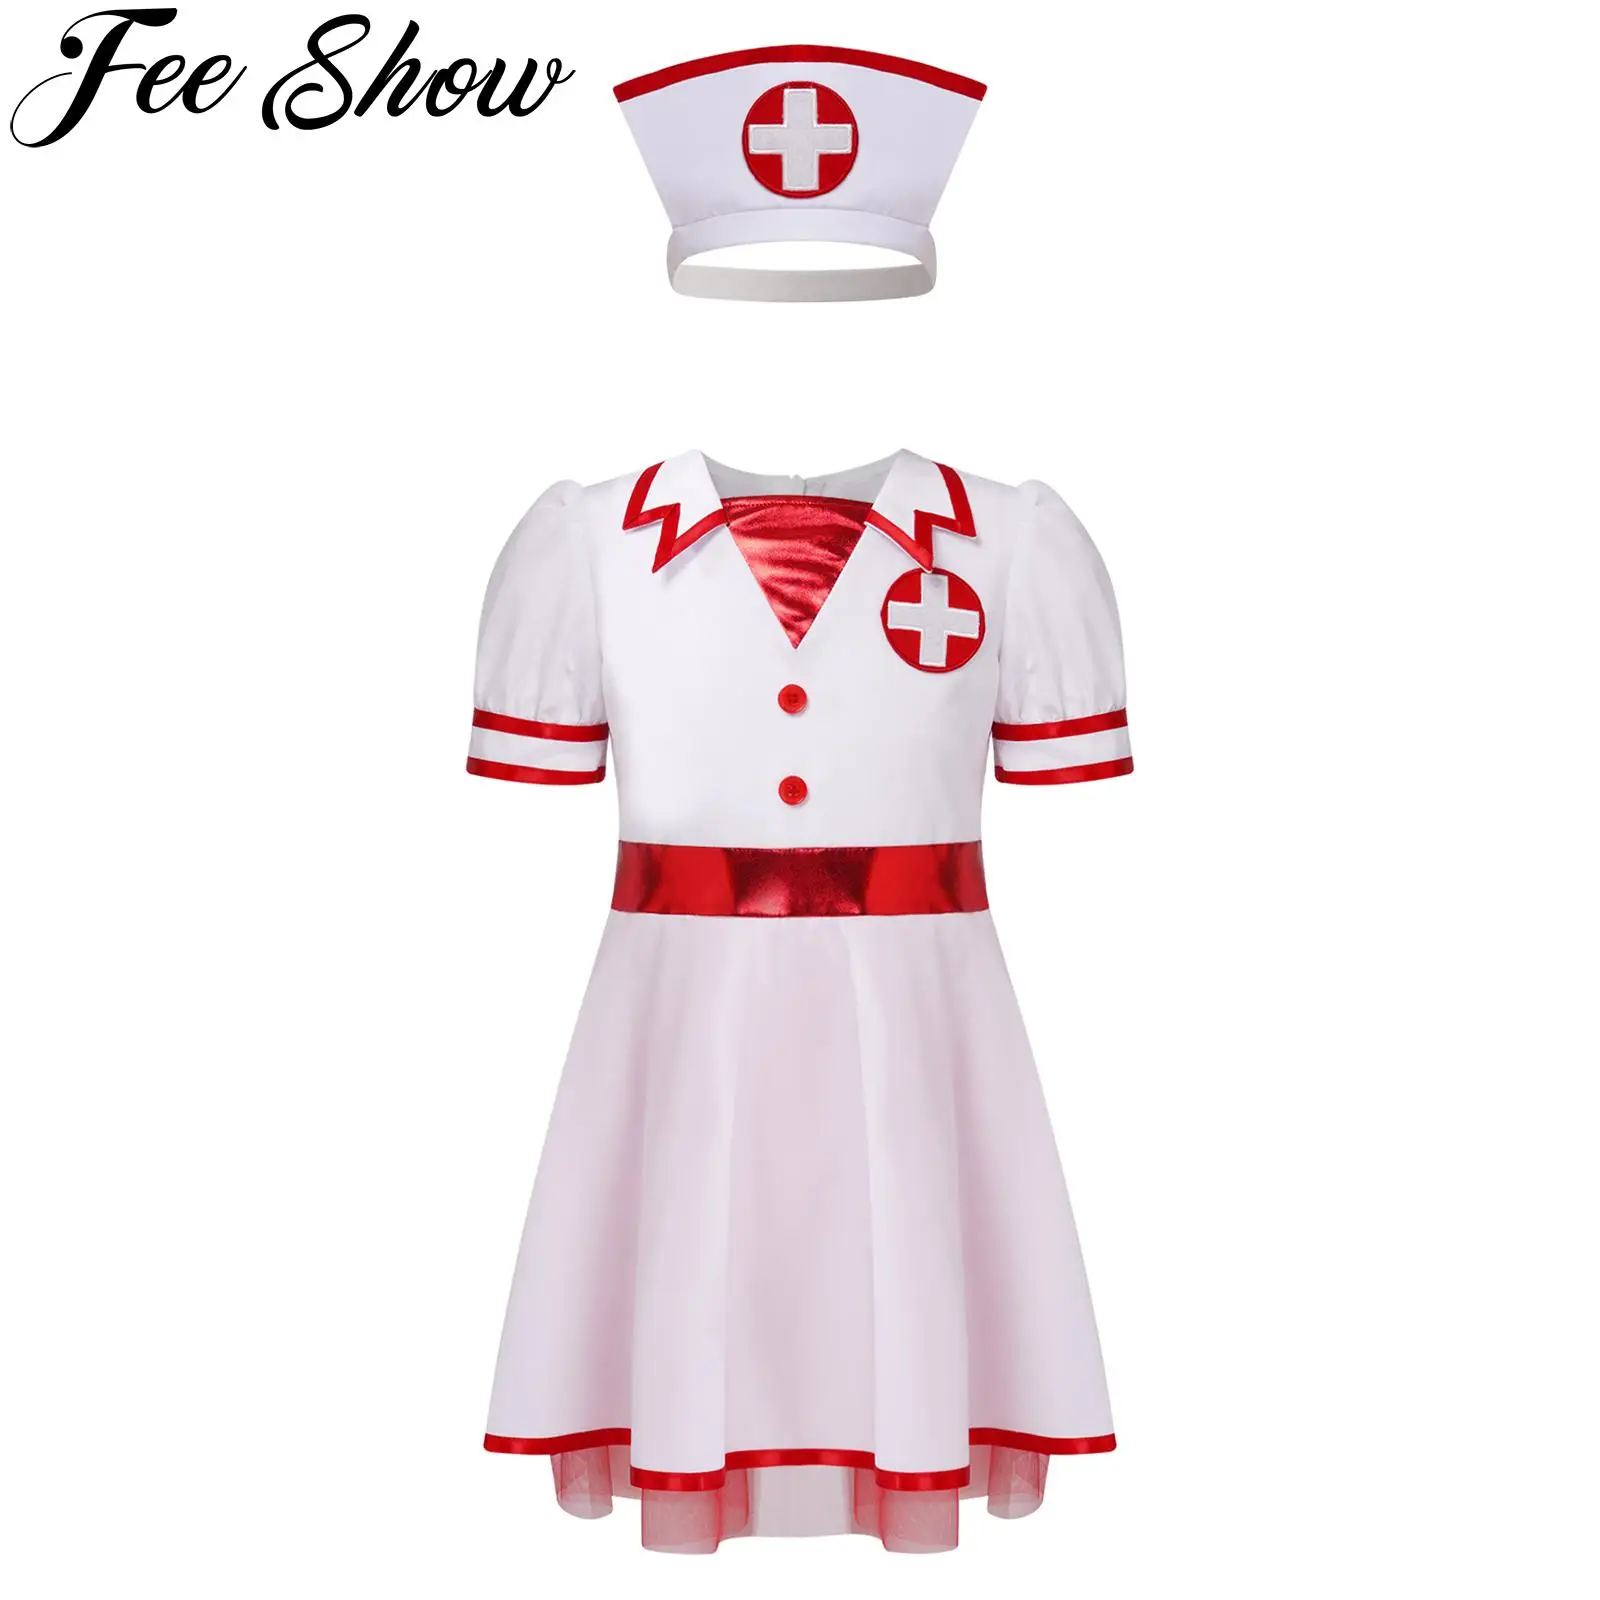 

Kids Girls Nurse Costume Puff Sleeve Cross Patch Colorblock Cosplay Dress with Hat Set for Halloween Role Play Dress Up Clothes